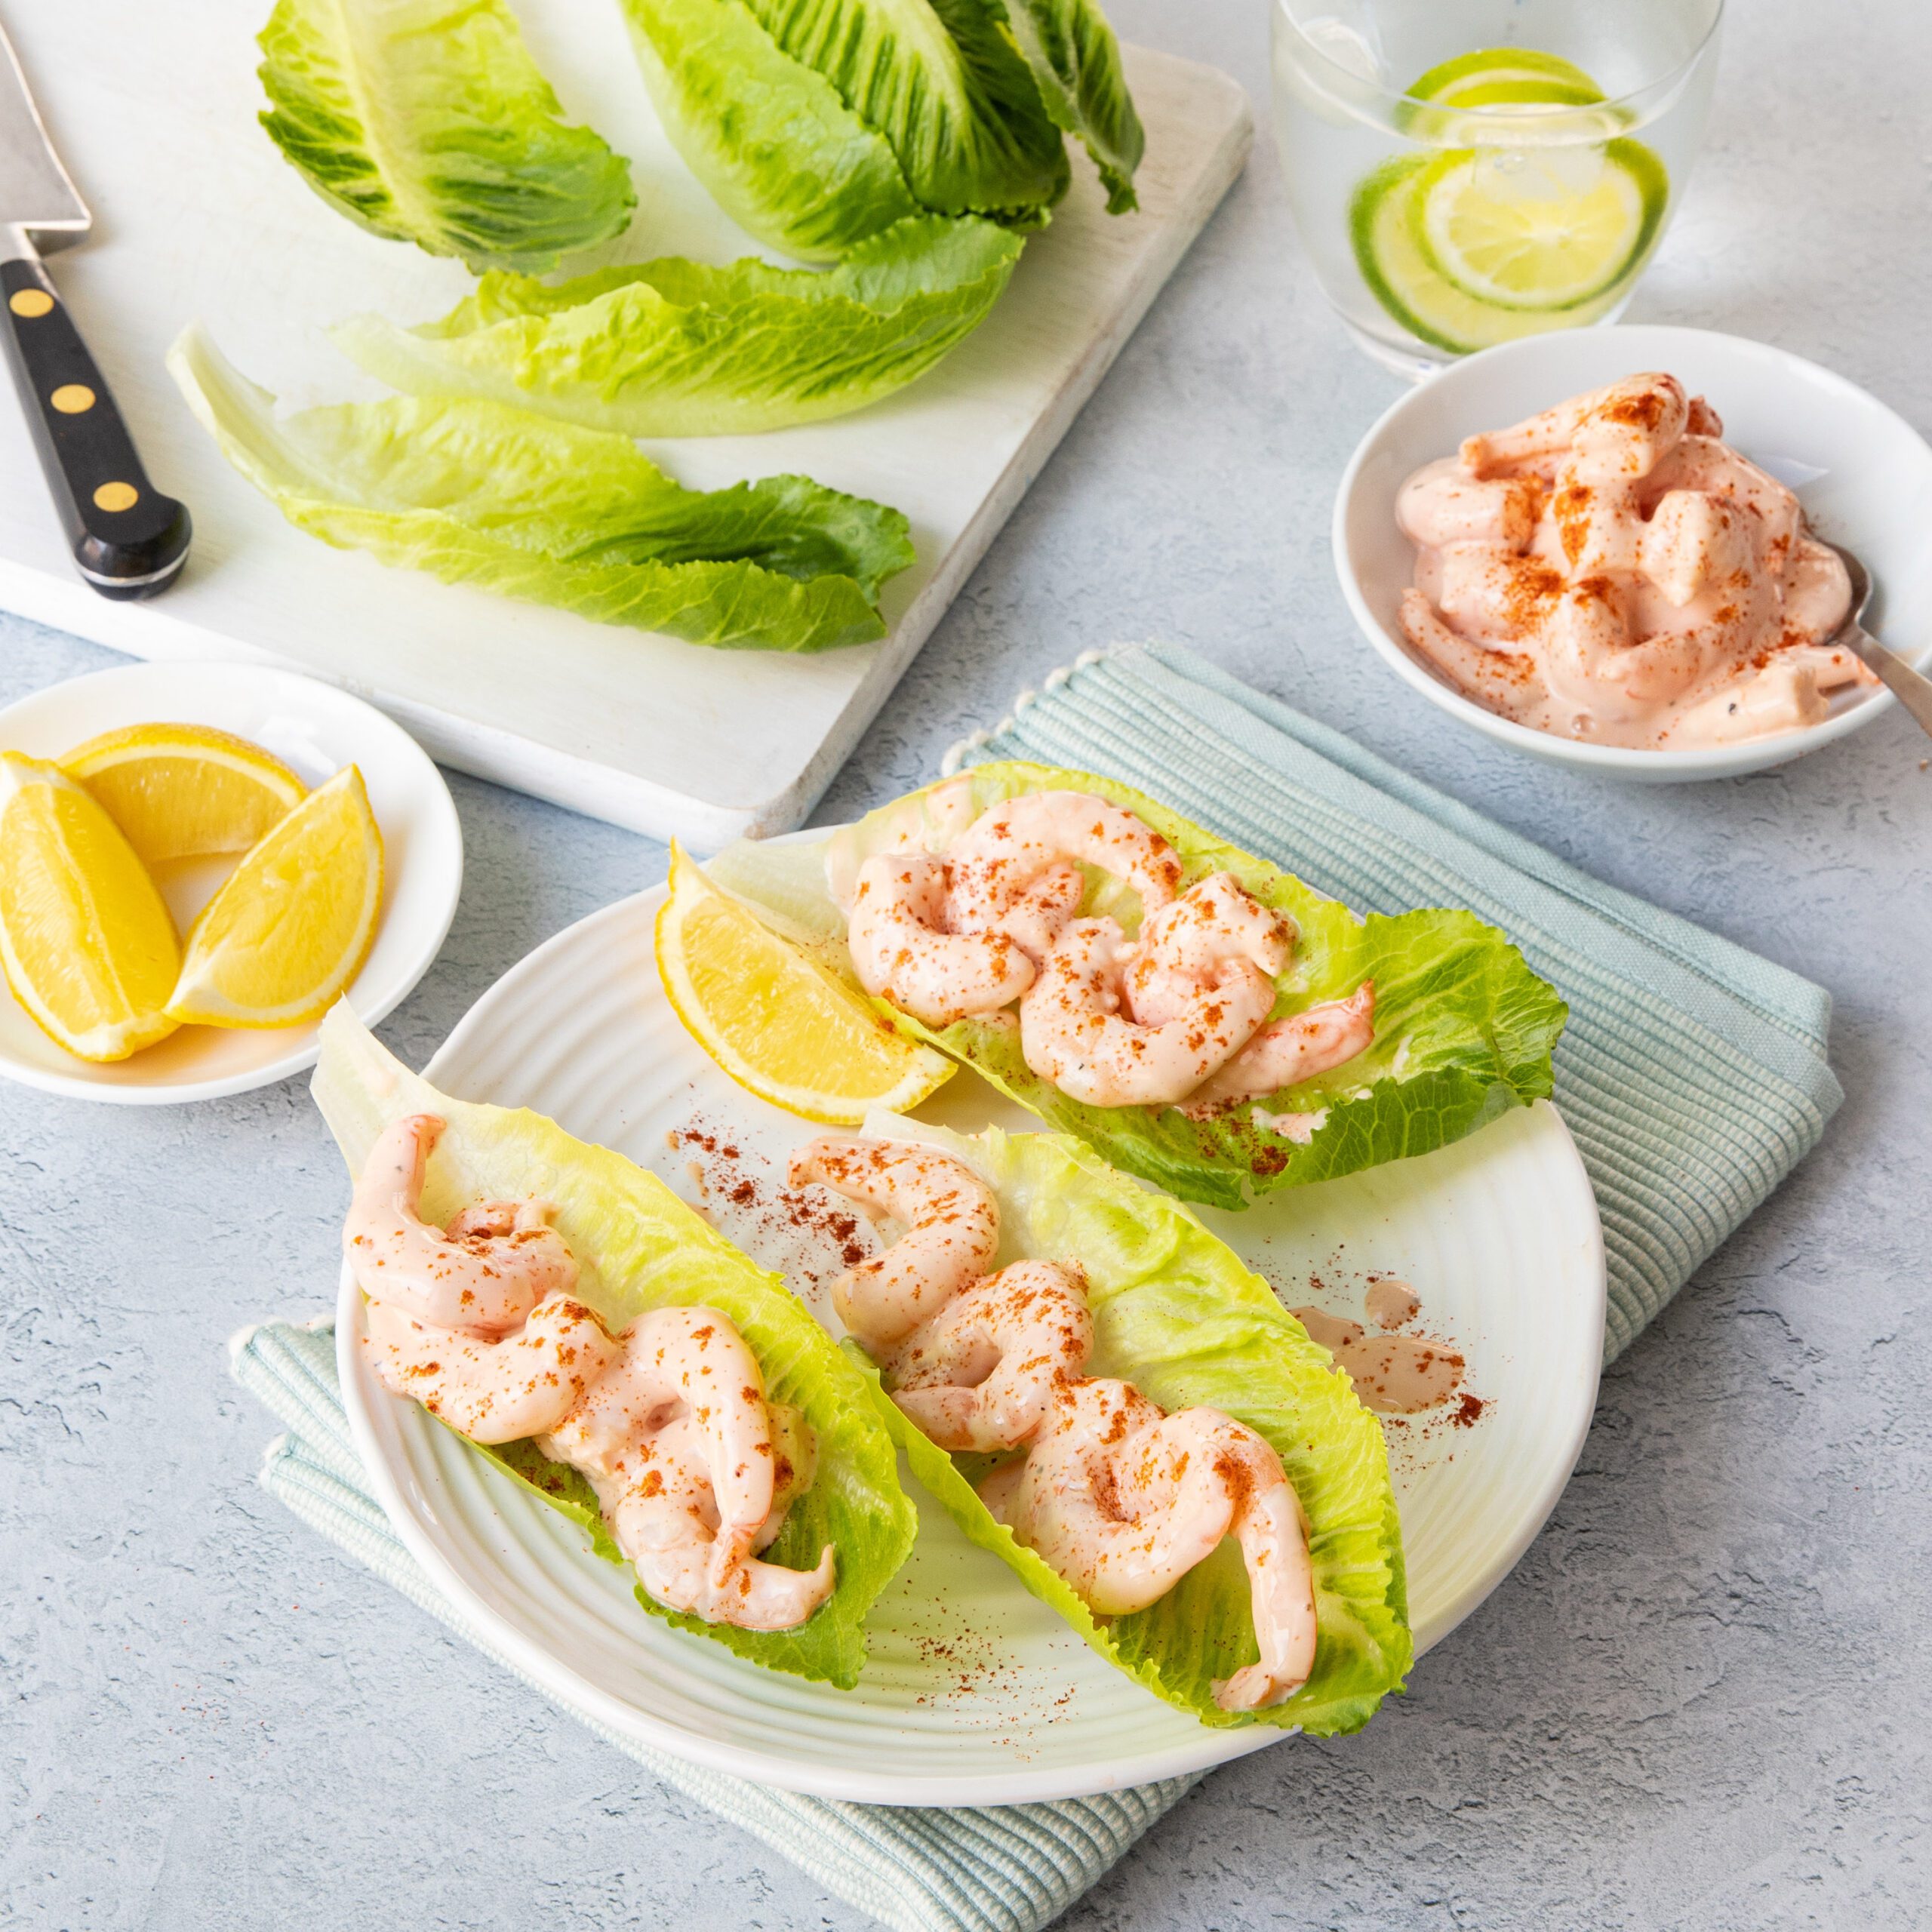 Prawn cocktail salad with snack lettuce cups